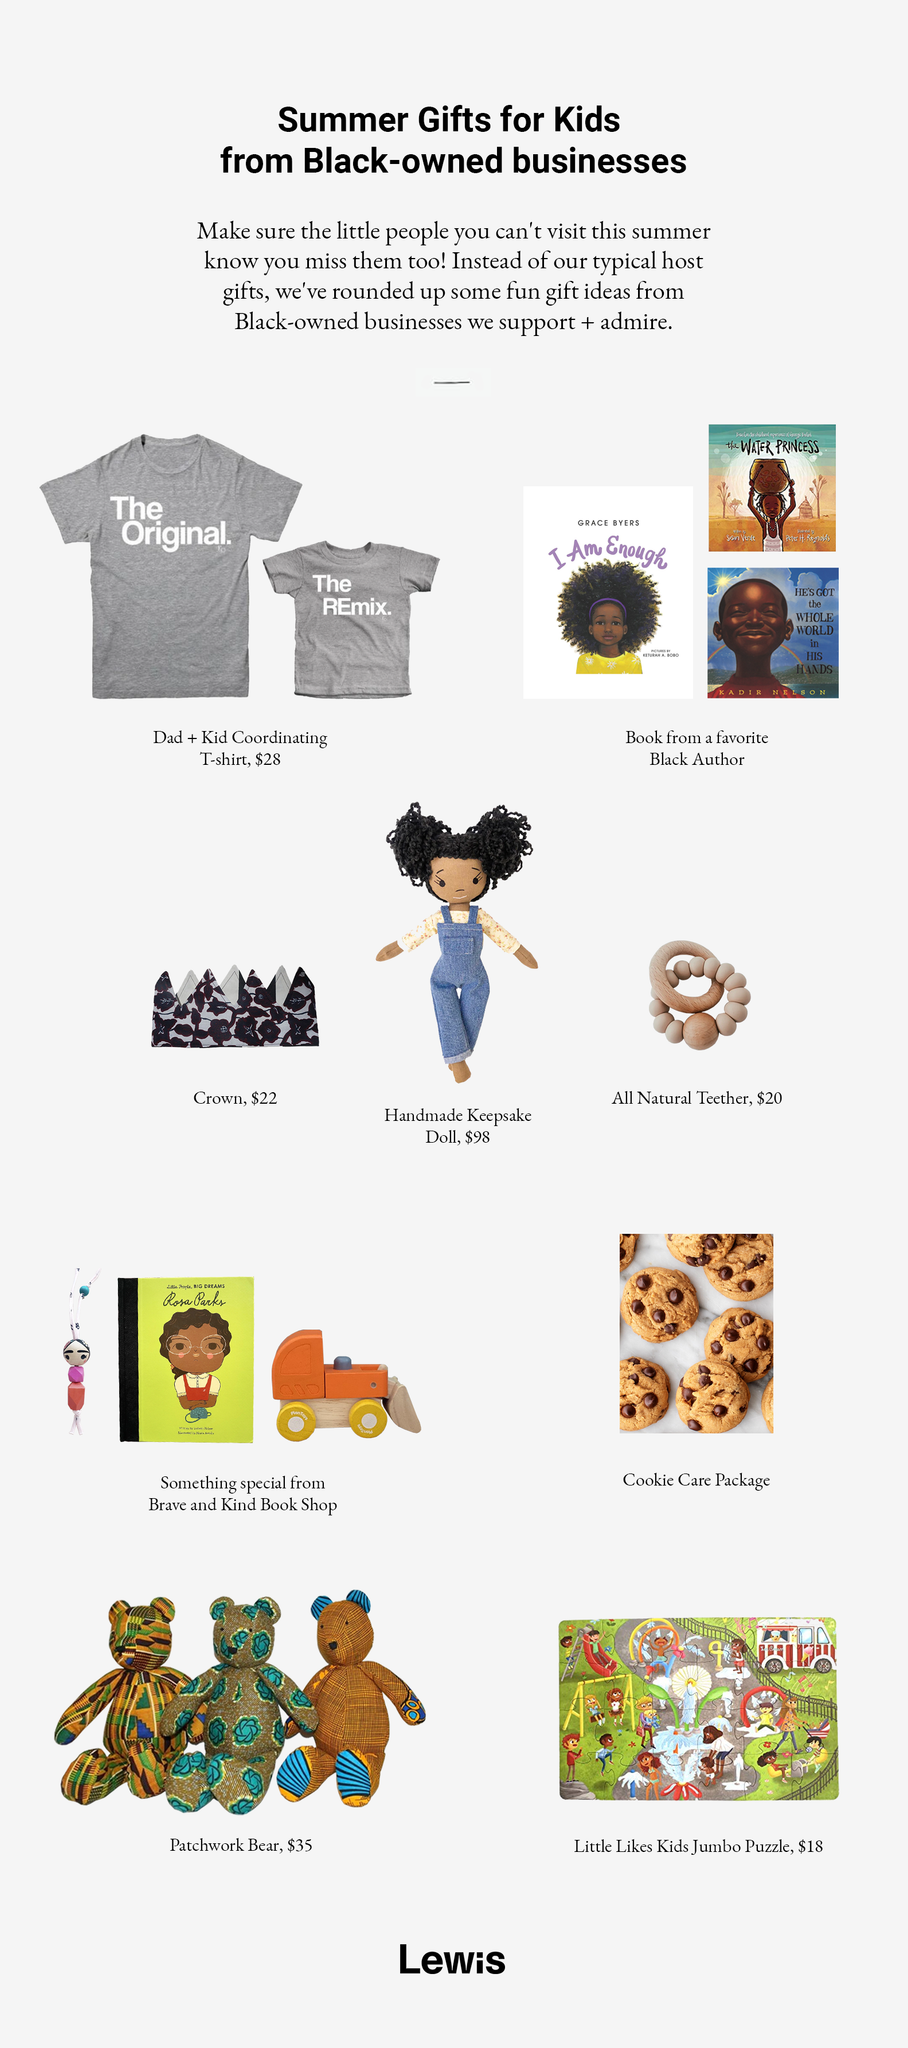 Roundup of children's toys and gifts from Black-owned businesses and artisans. 